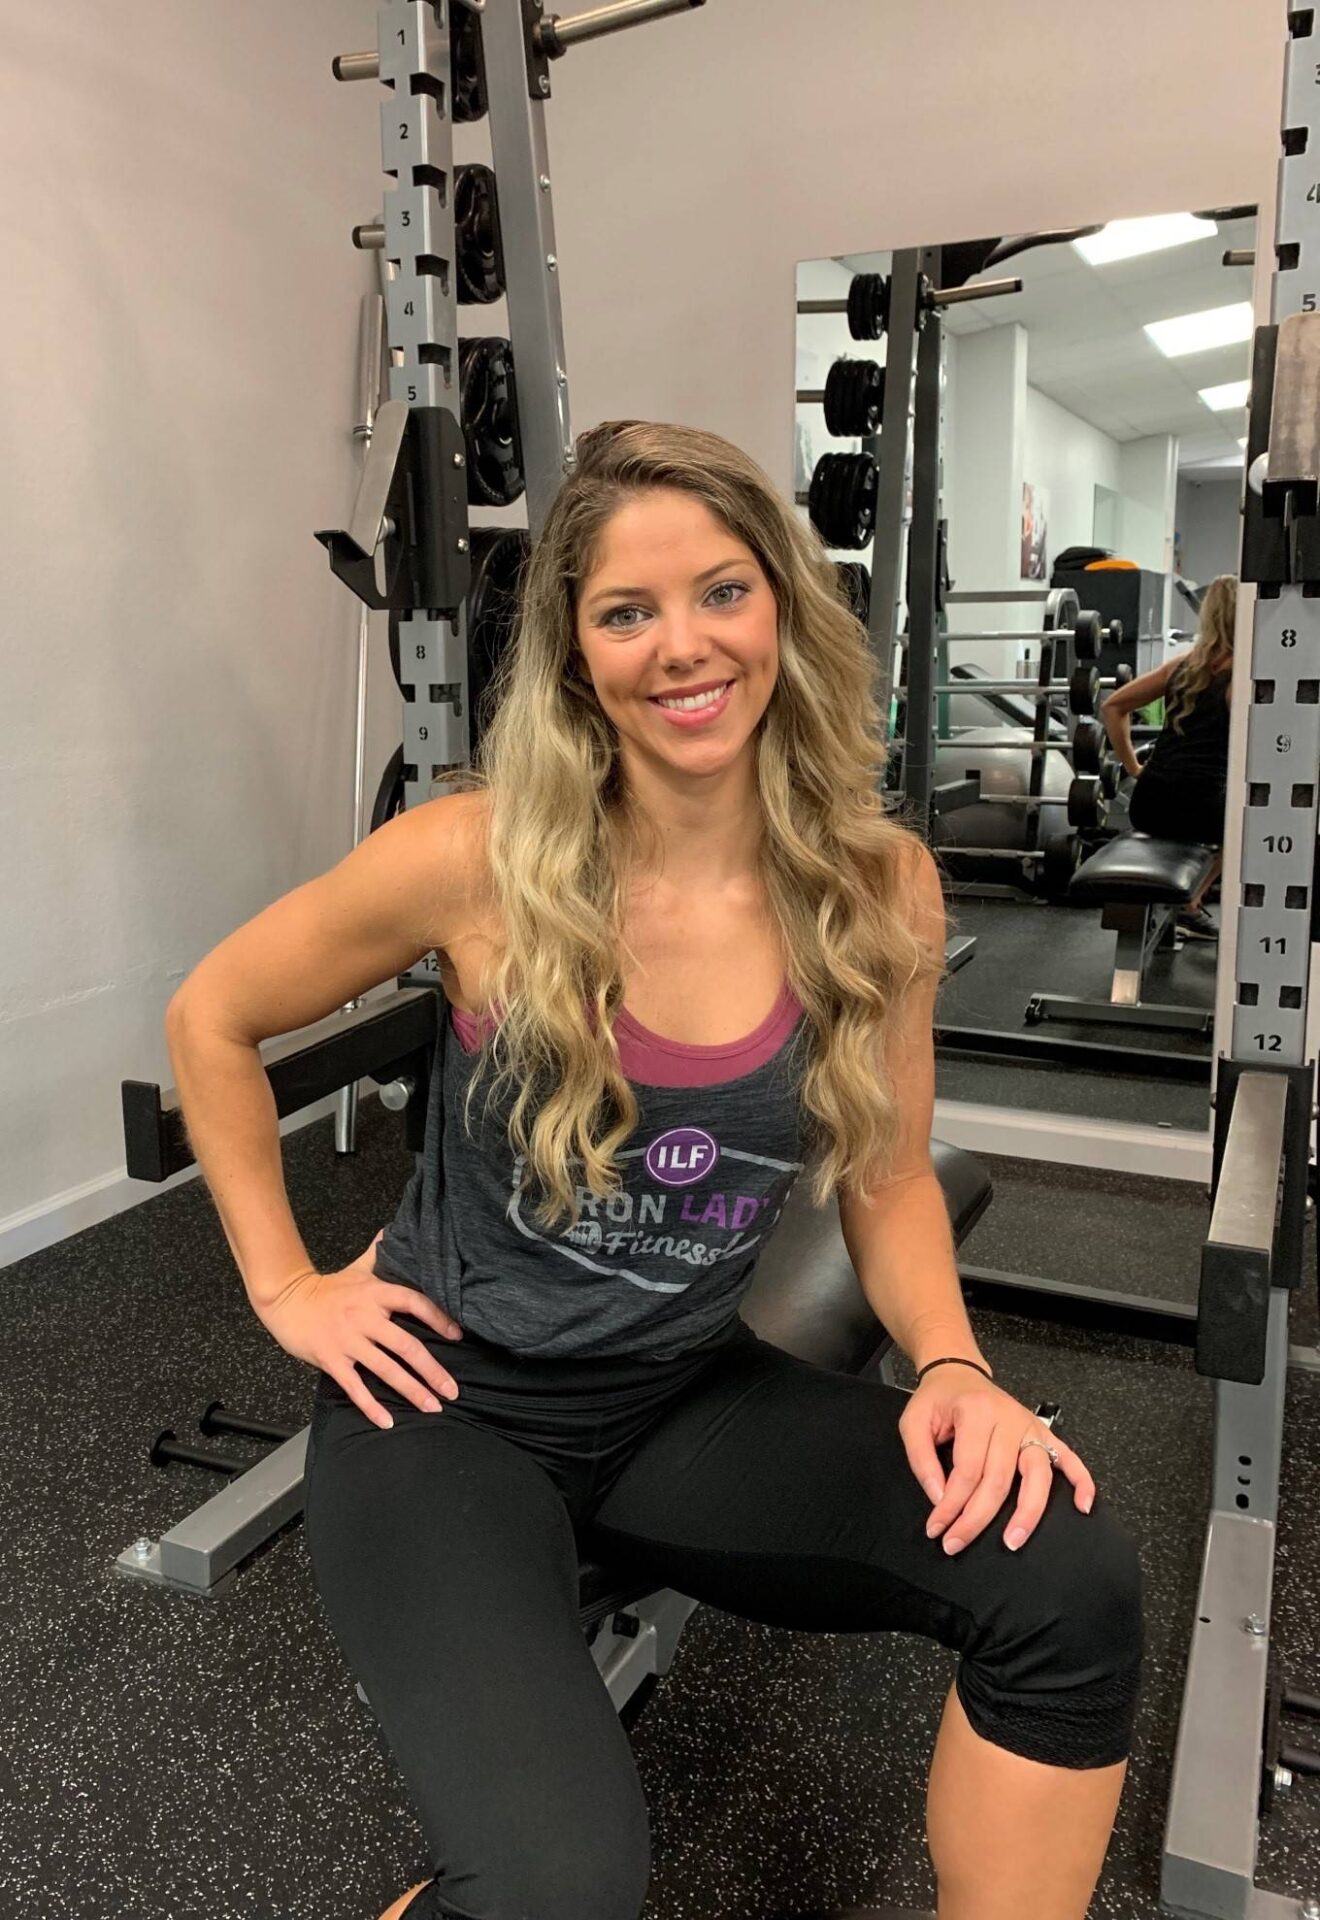 Shannon Rowland, a trainer at Iron Lady Fitness